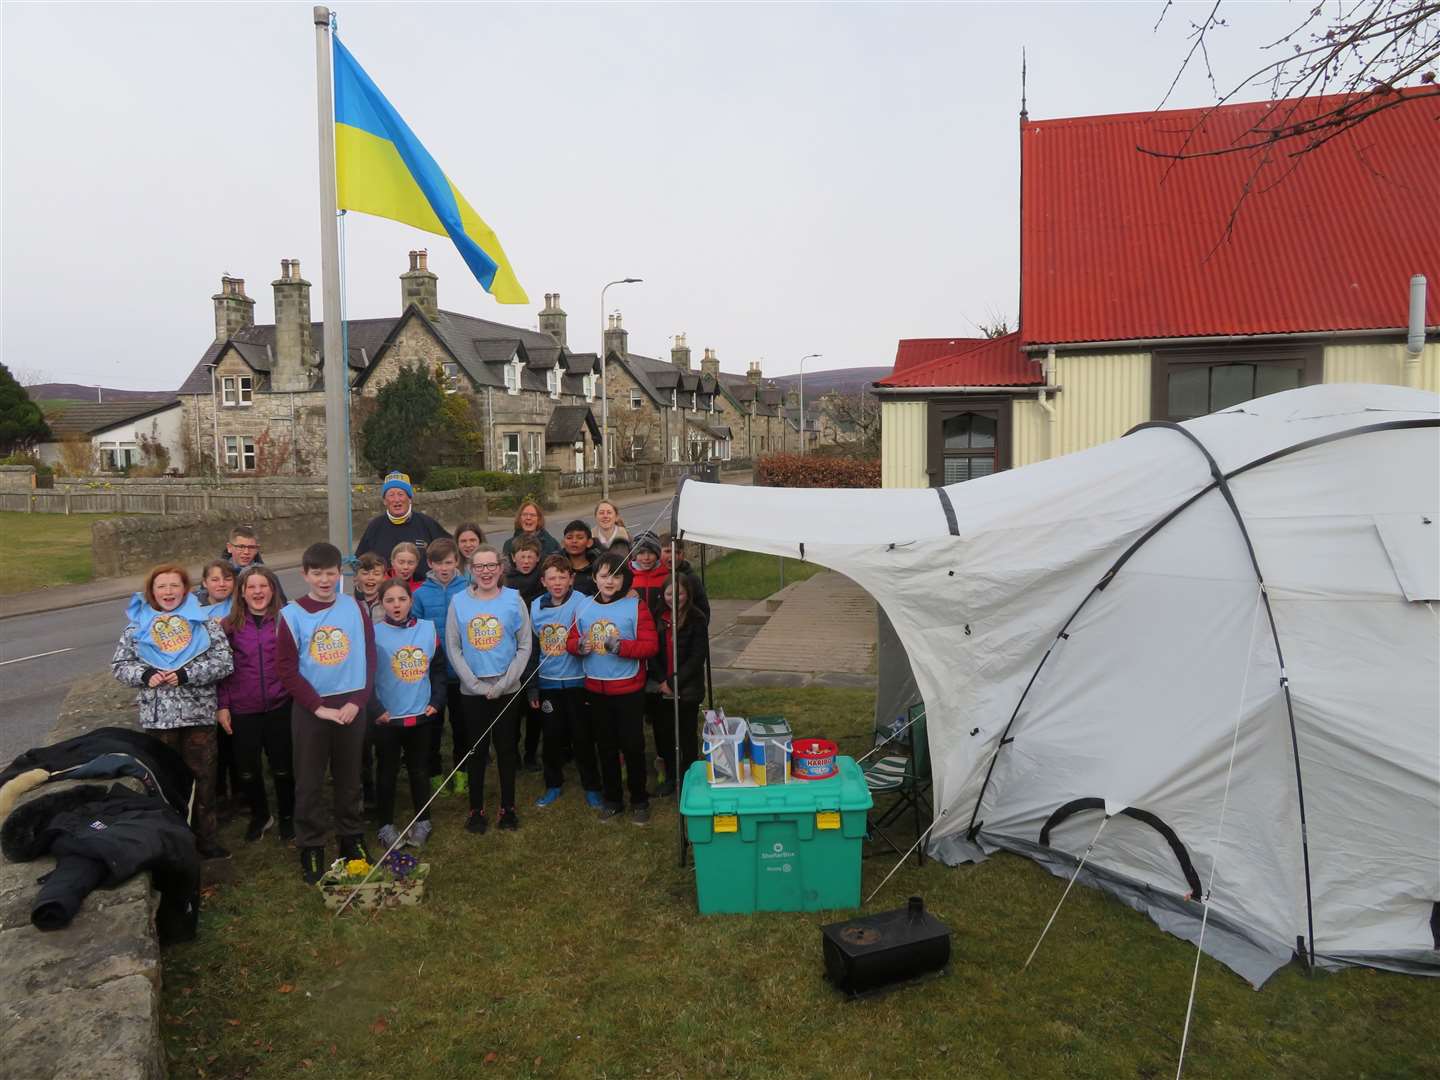 Rotakids from Brora Primary School were the last to visit Alistair Risk during his outdoor sojurn to raise money to buy ShelterBox tents for Ukrainian refugees.